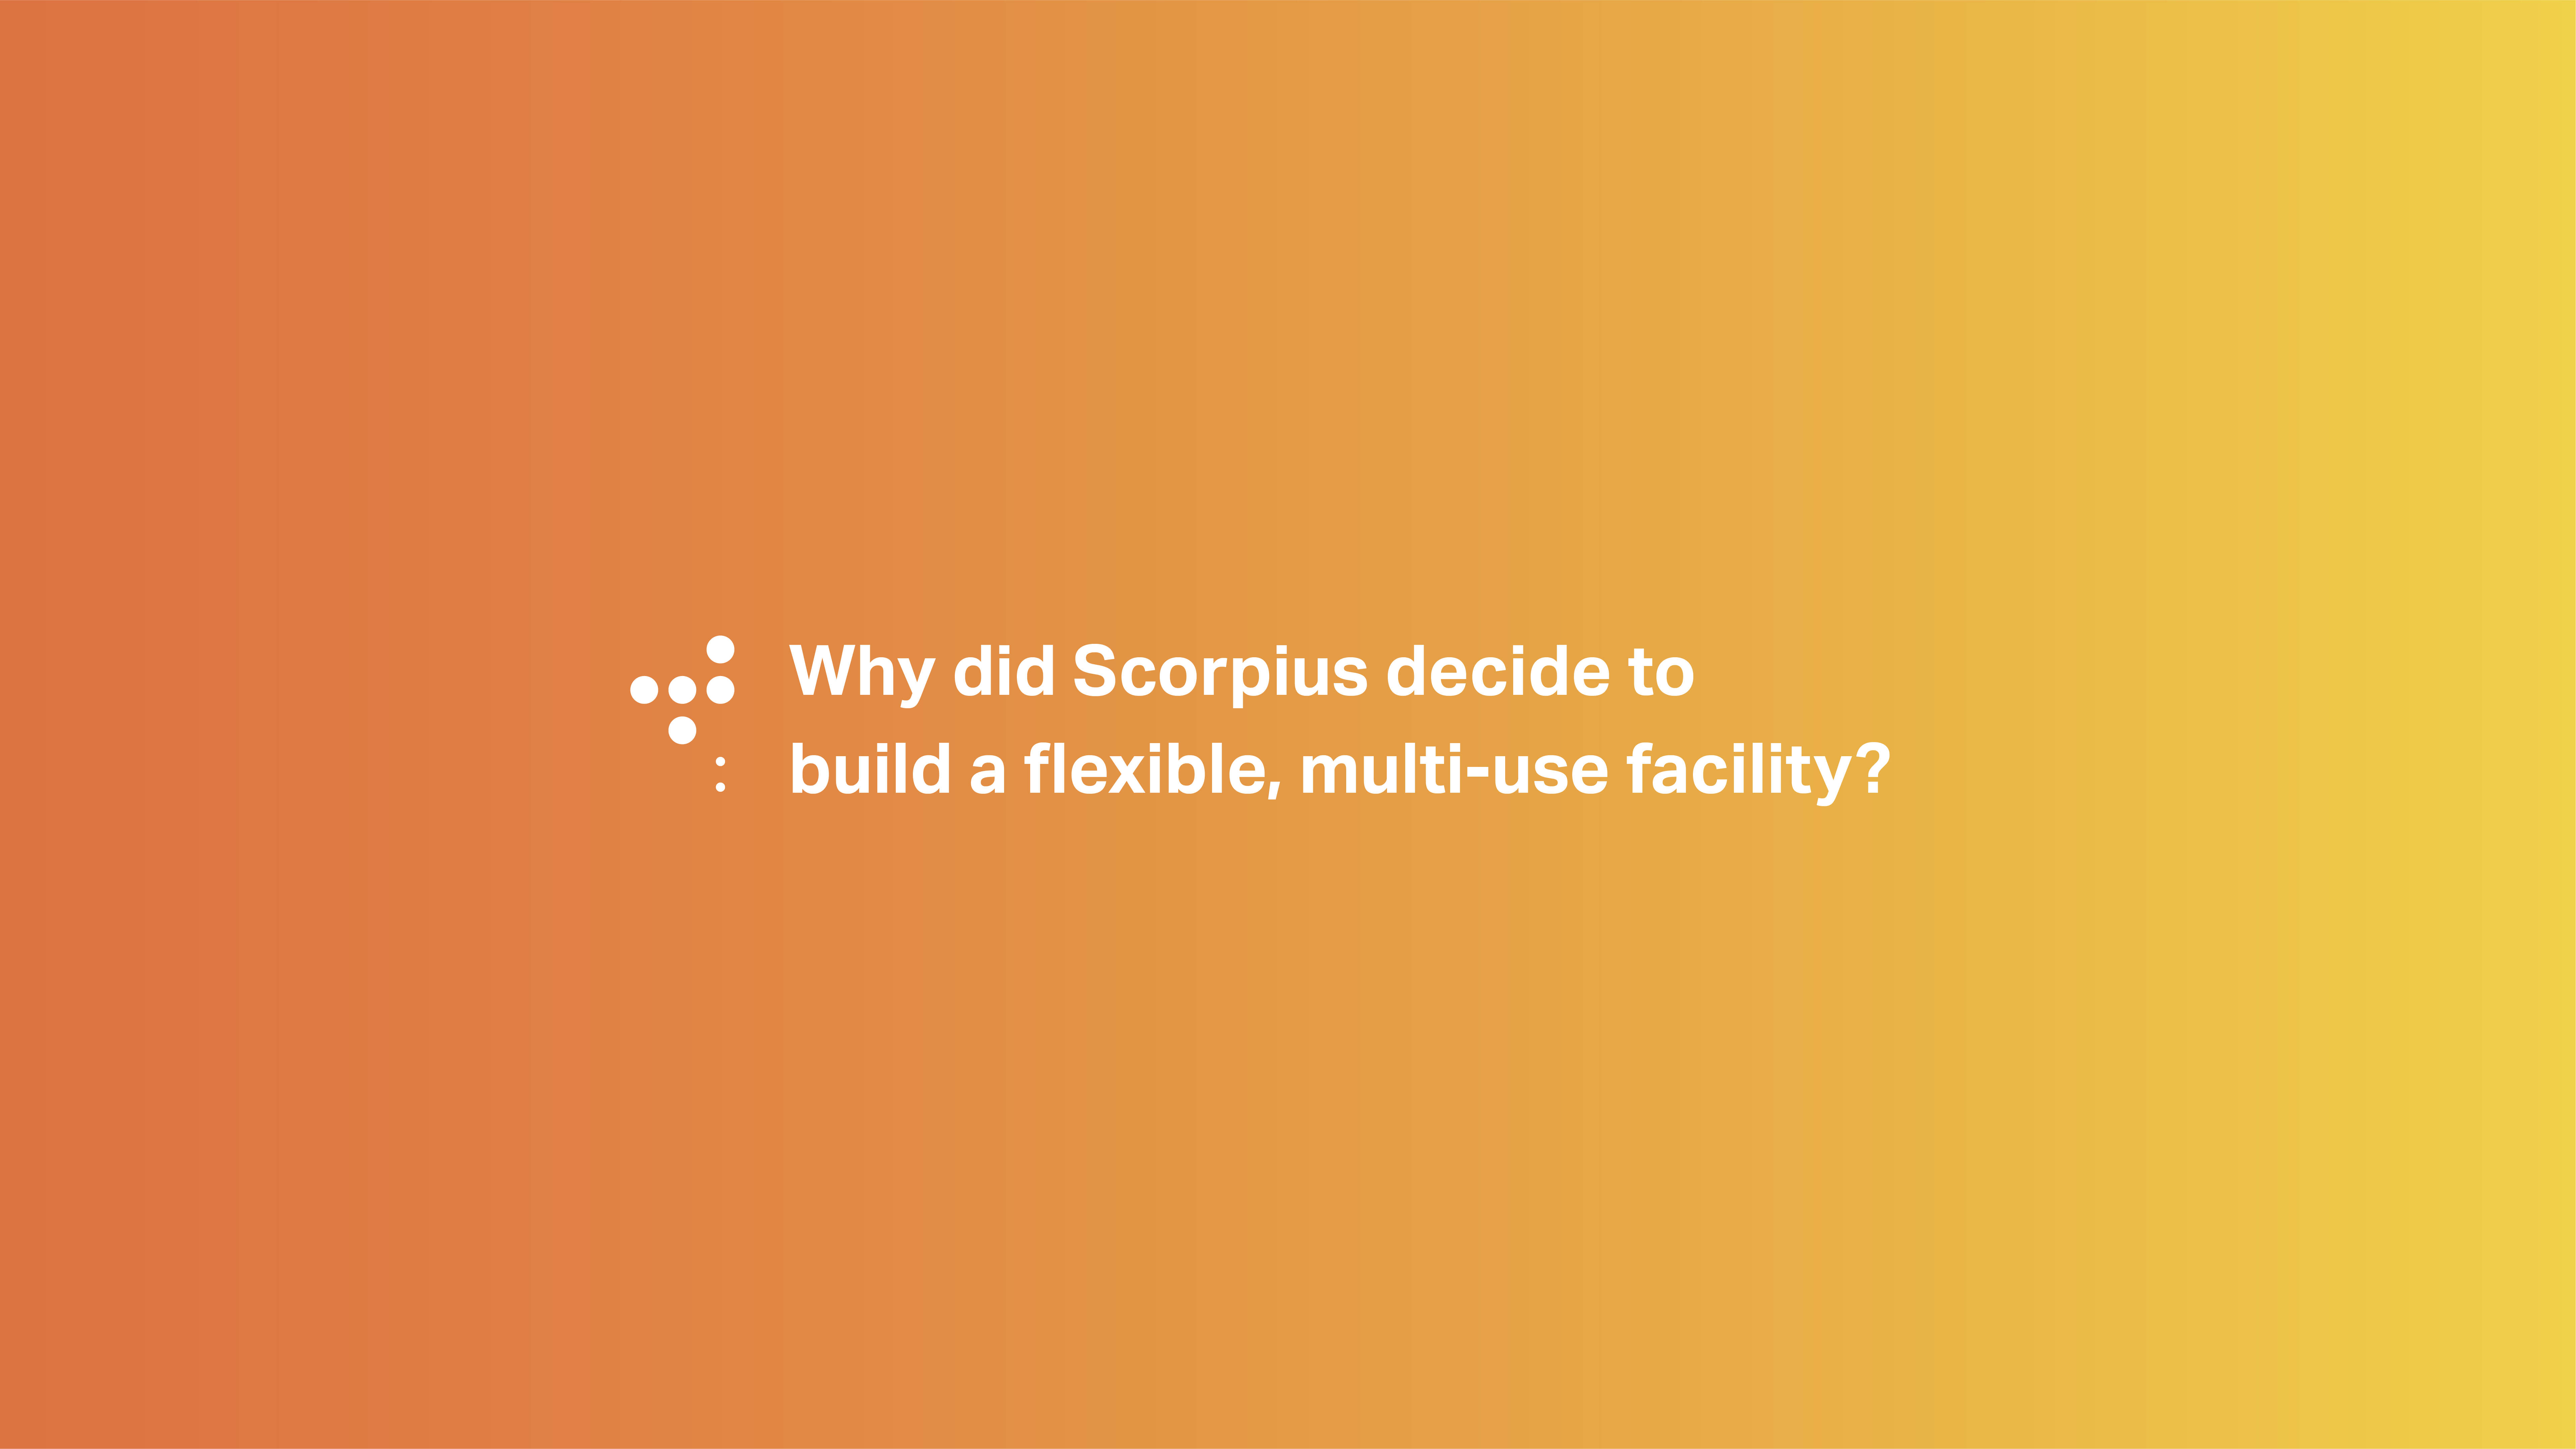 Why did Scorpius decide to build a flexible, multi-use facility?